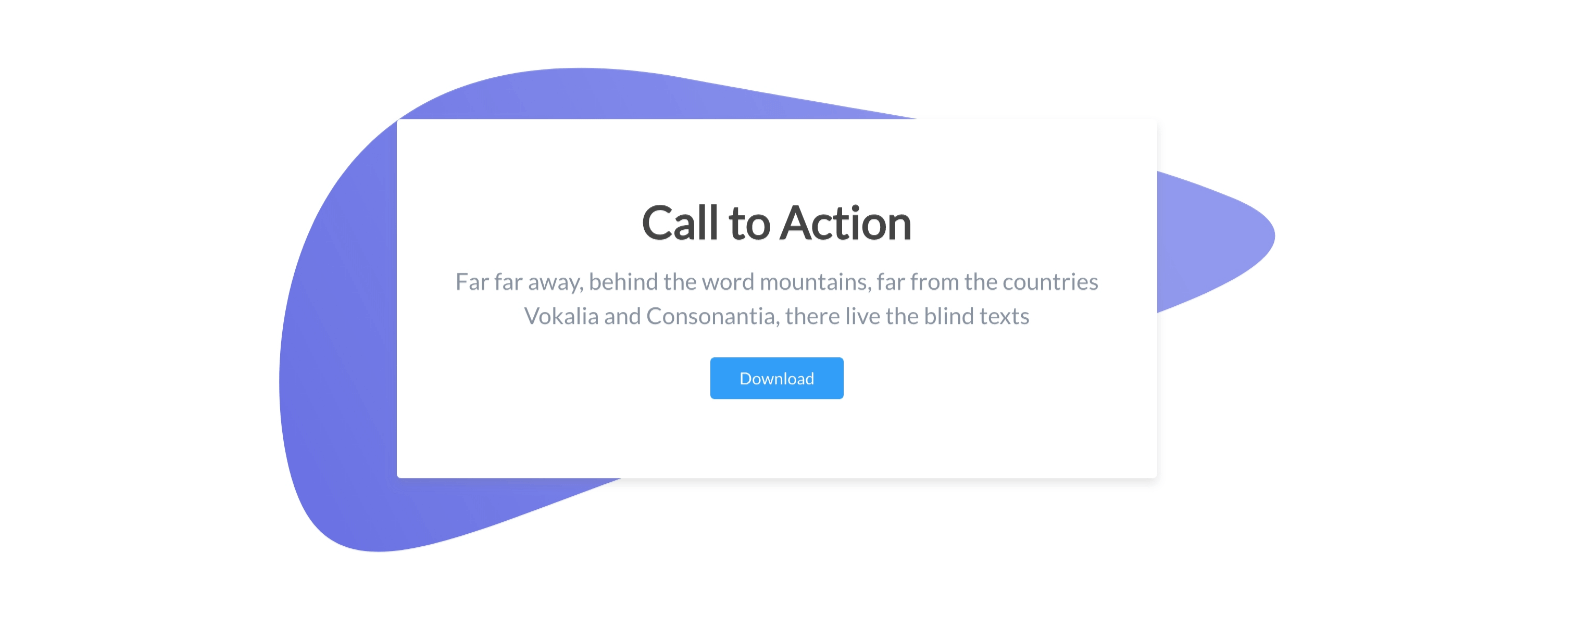 How can I build a call-to-action page with Bootstrap?